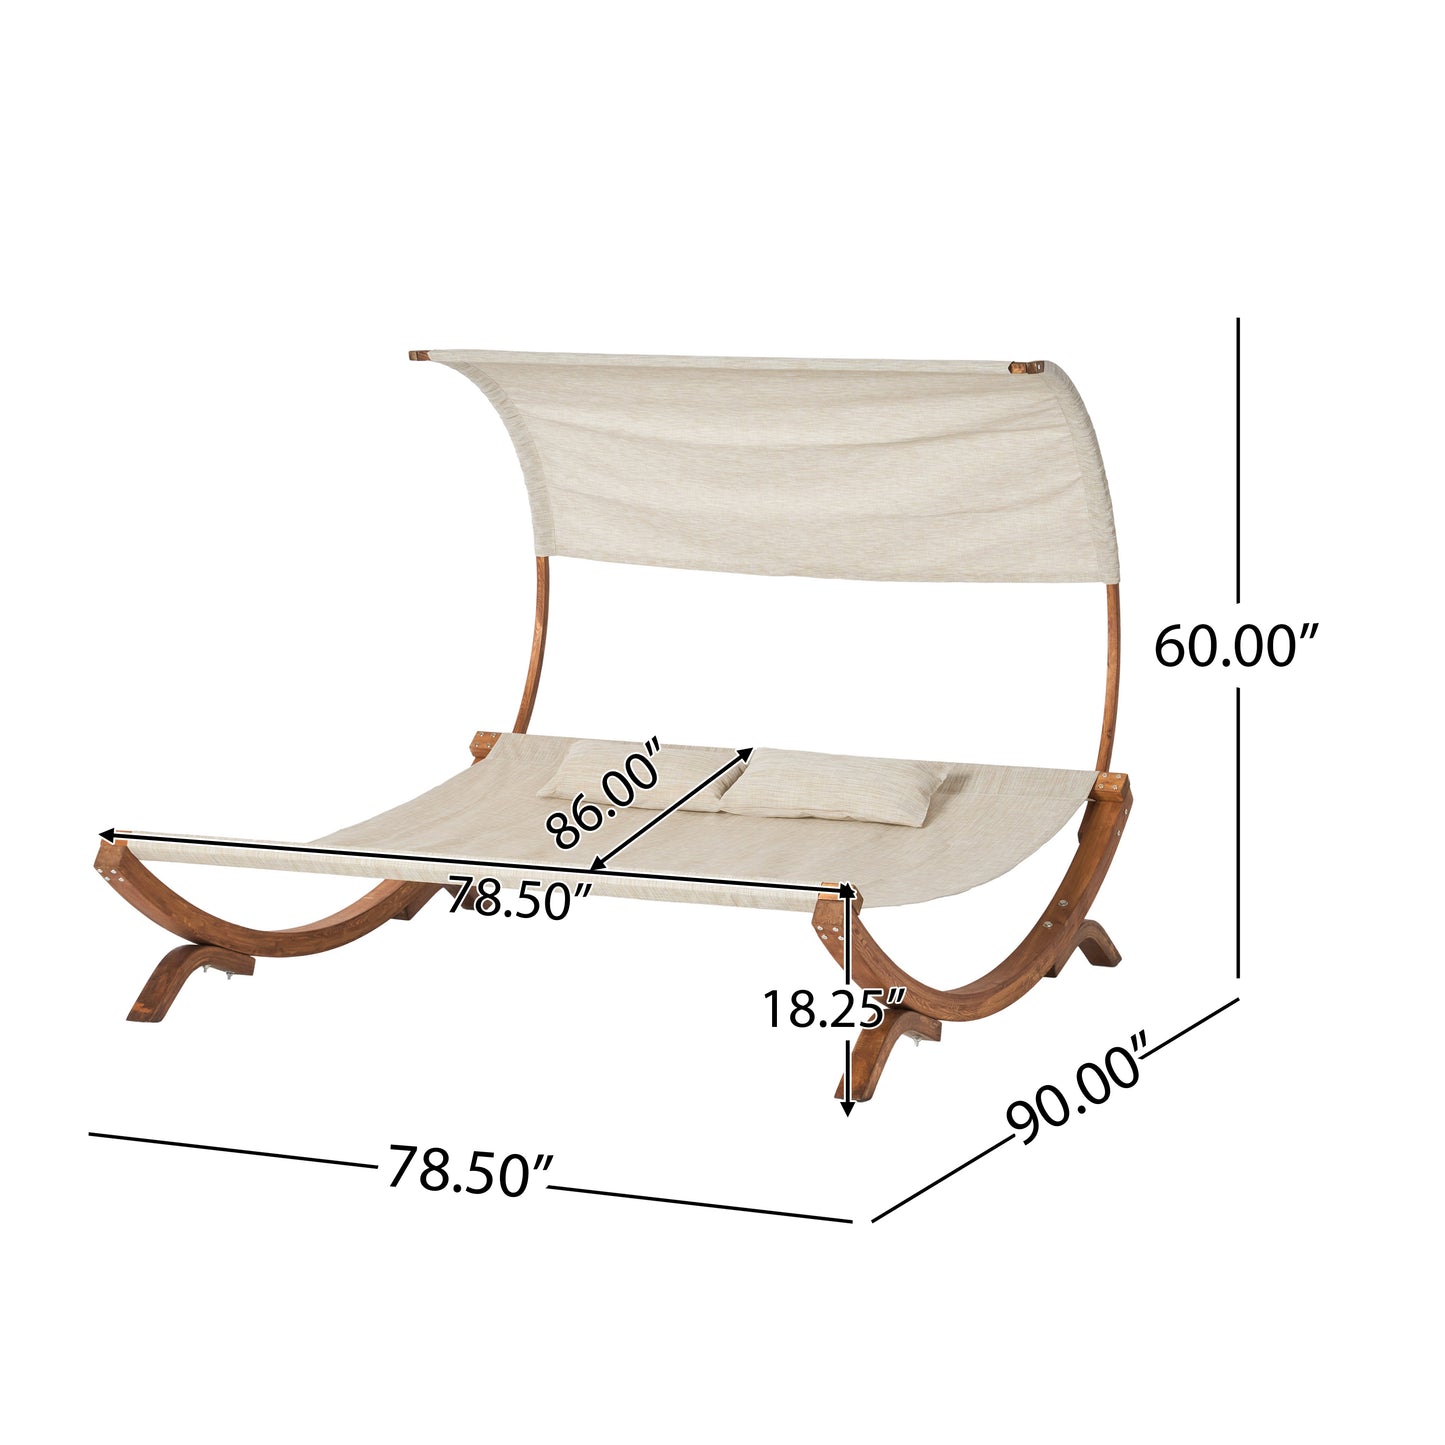 Rosalie Outdoor Patio Chaise Lounge Sunbed and Canopy